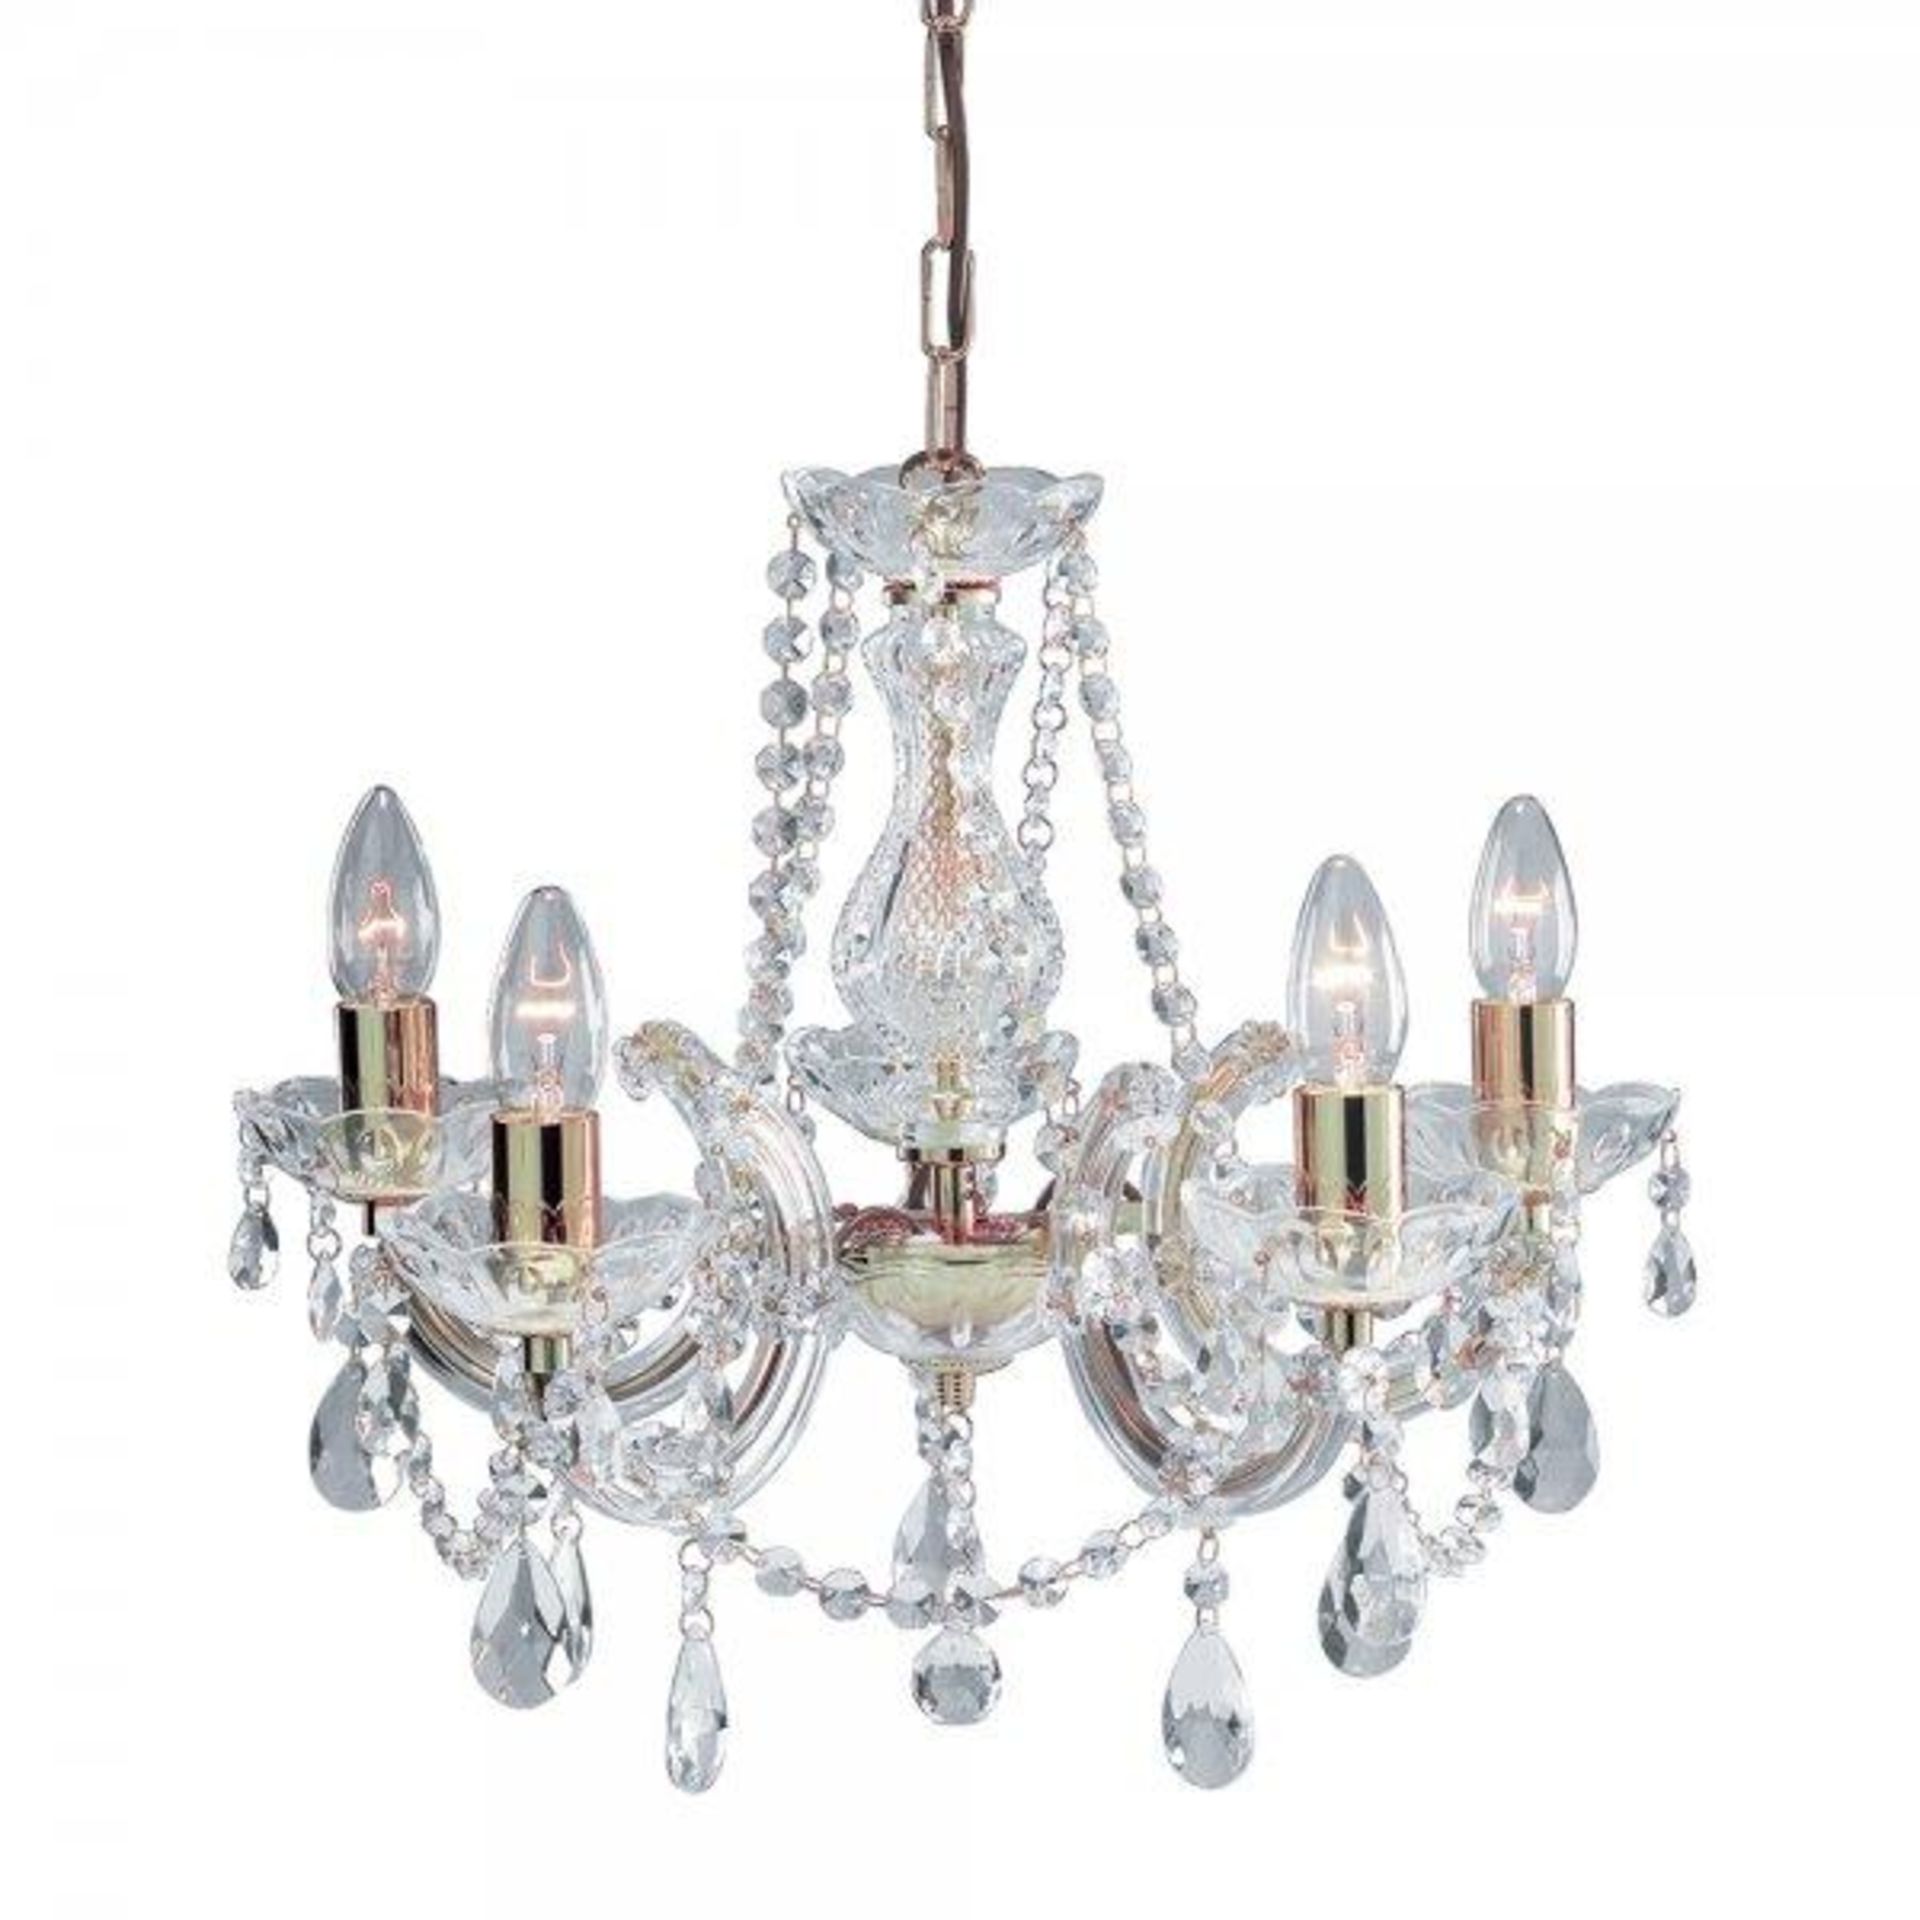 1 x Marie Therese 5 Light Chandelier Polished Brass - New Boxed Stock - CL323 - Ref: Rack A Top - 69 - Image 2 of 2